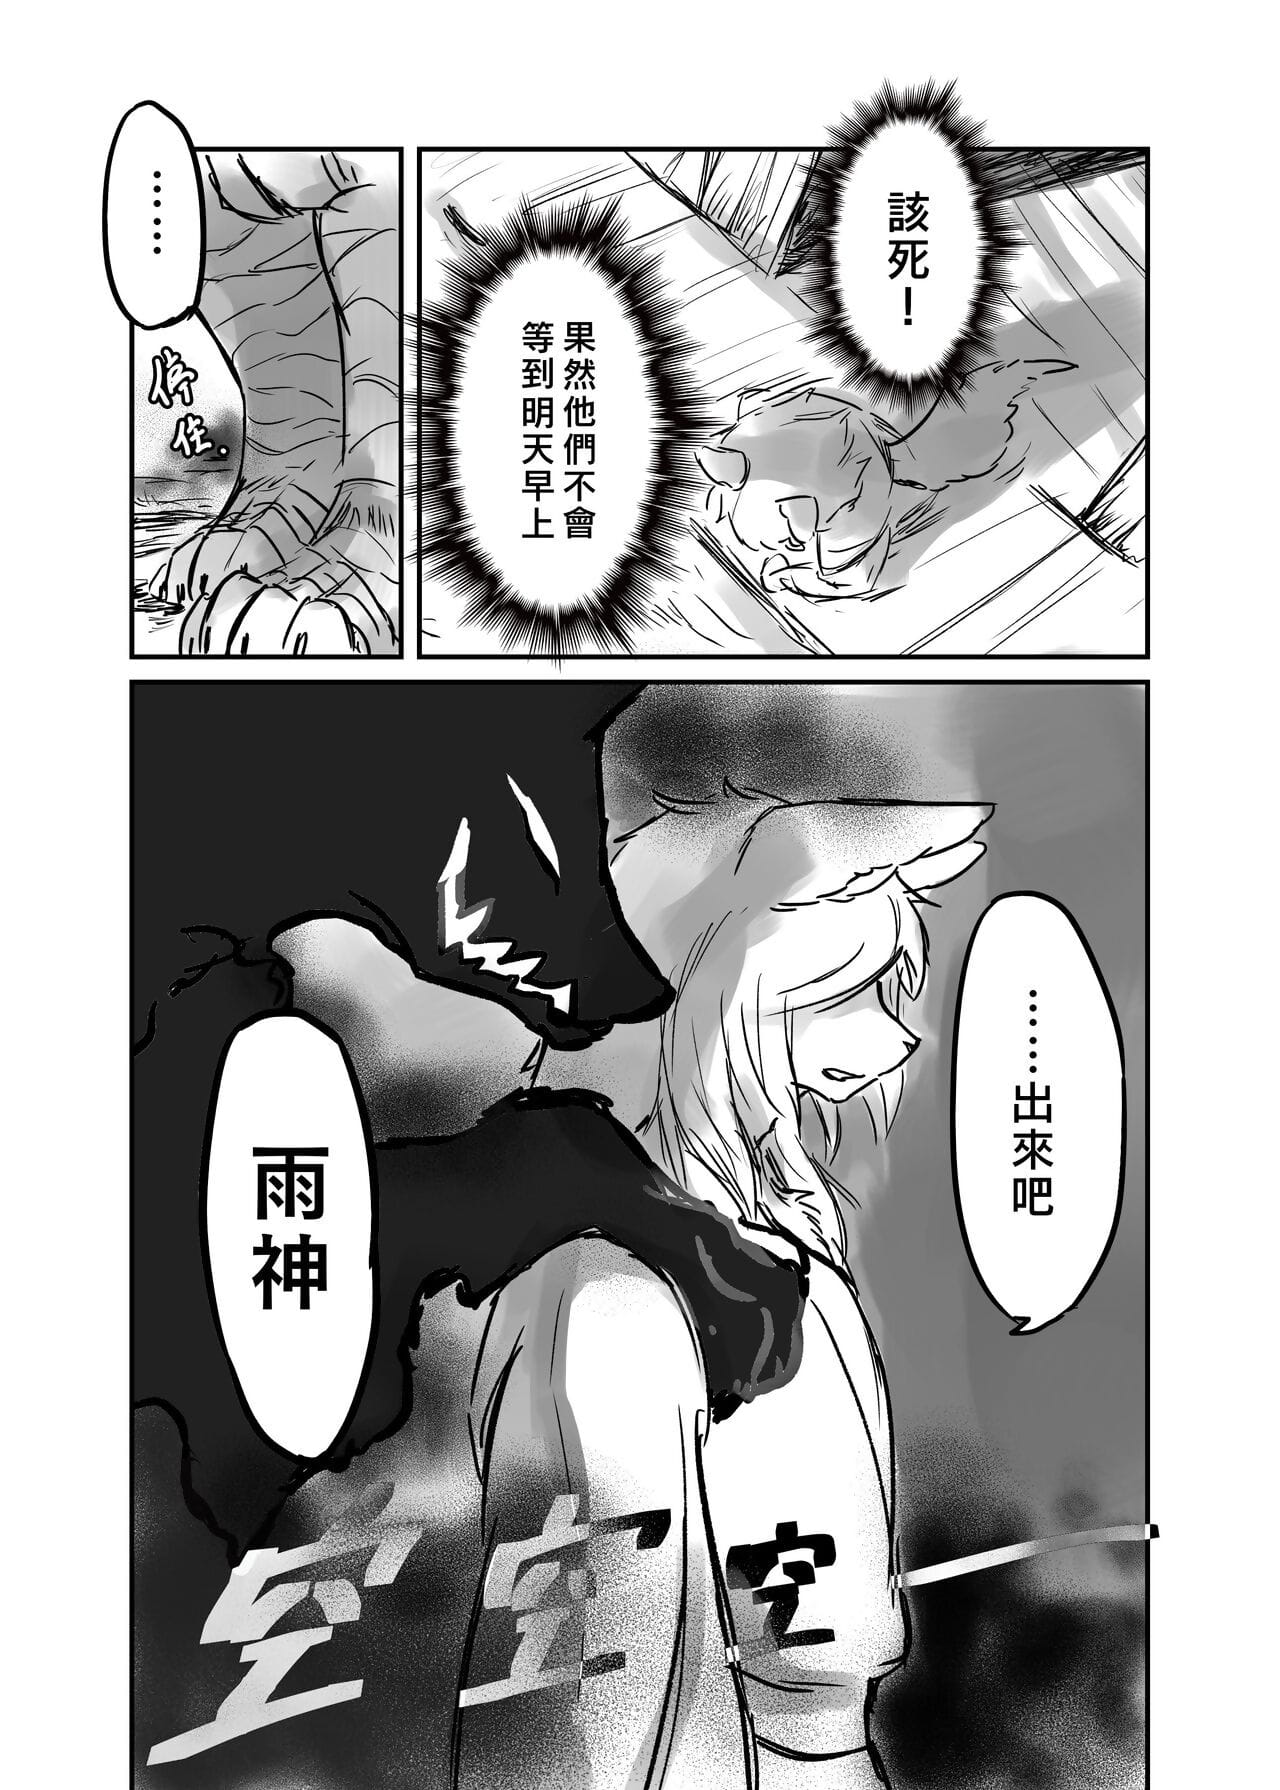 （the visitante 他乡之人 by：鬼流 Parte 2 page 1